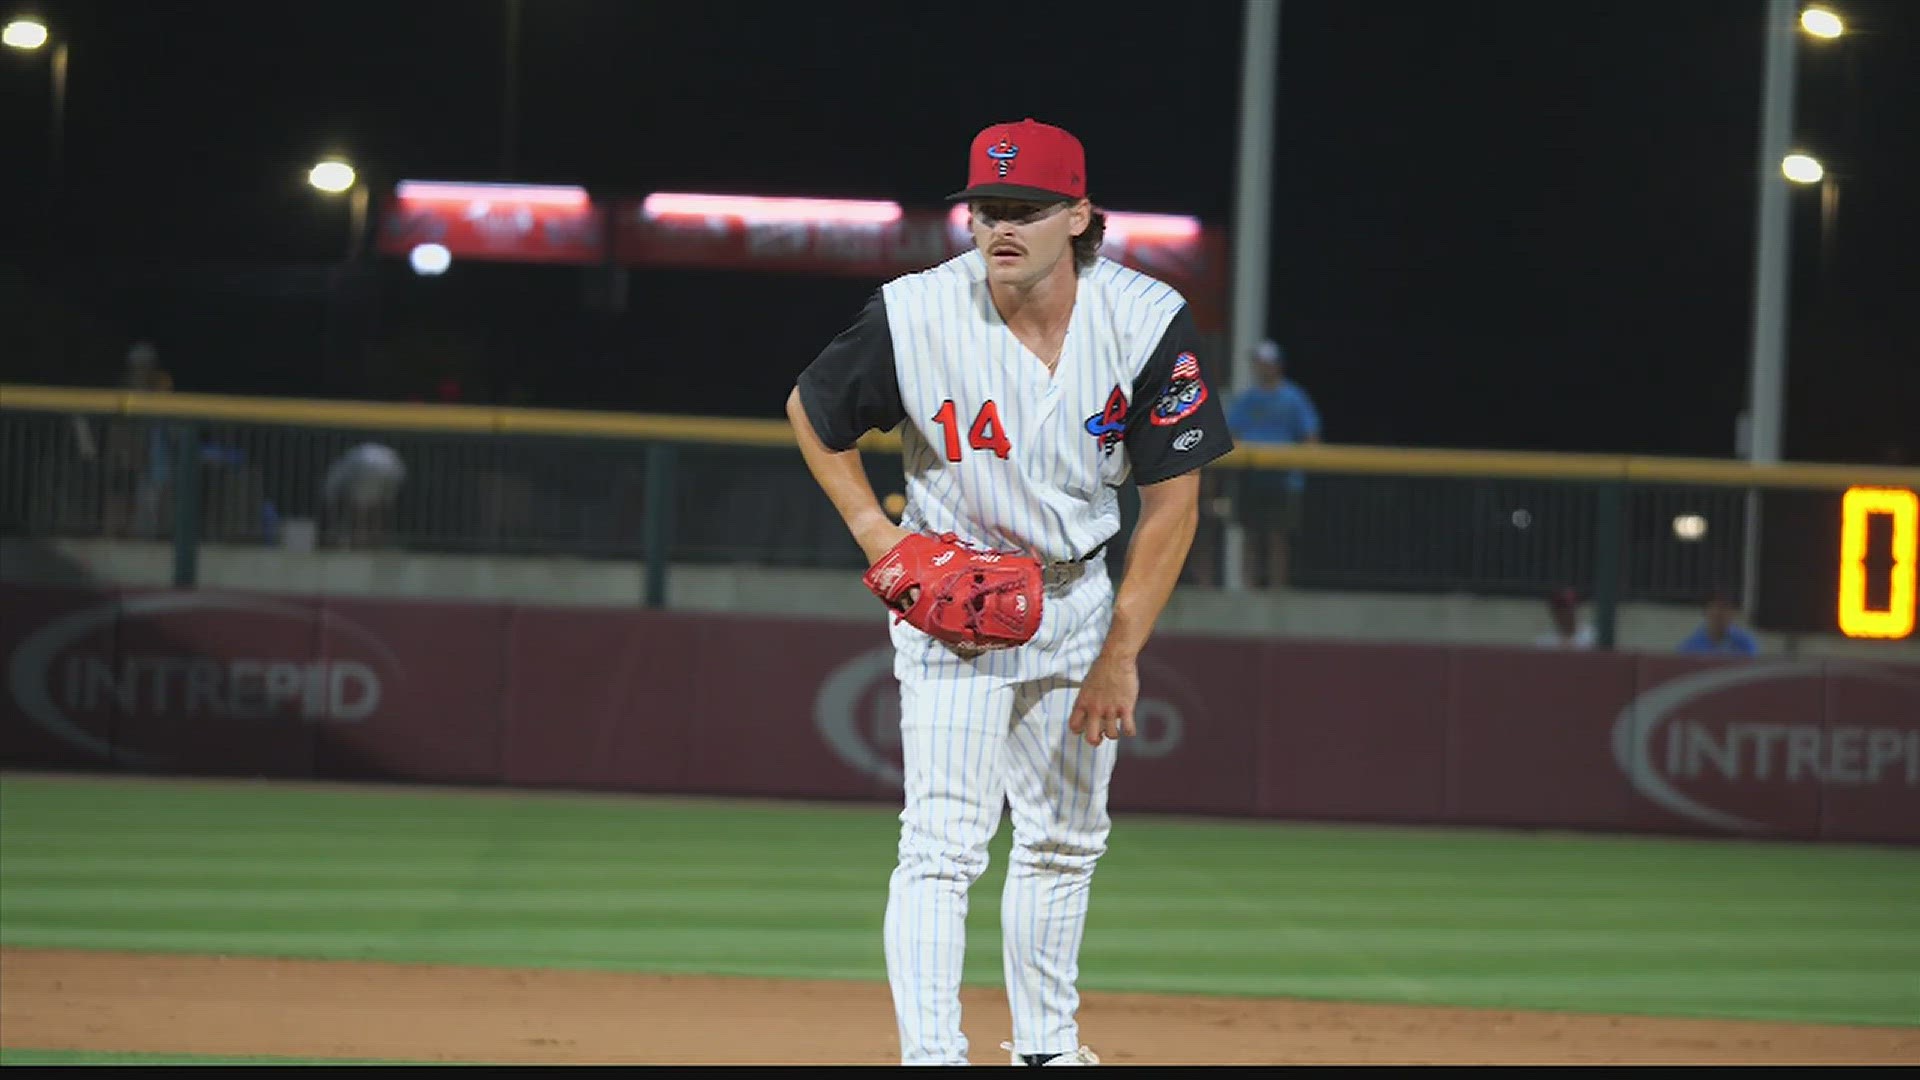 On Thursday, the Los Angeles Angels recalled left-handed pitcher Kolton Ingram from the Trash Pandas for his Major League debut.